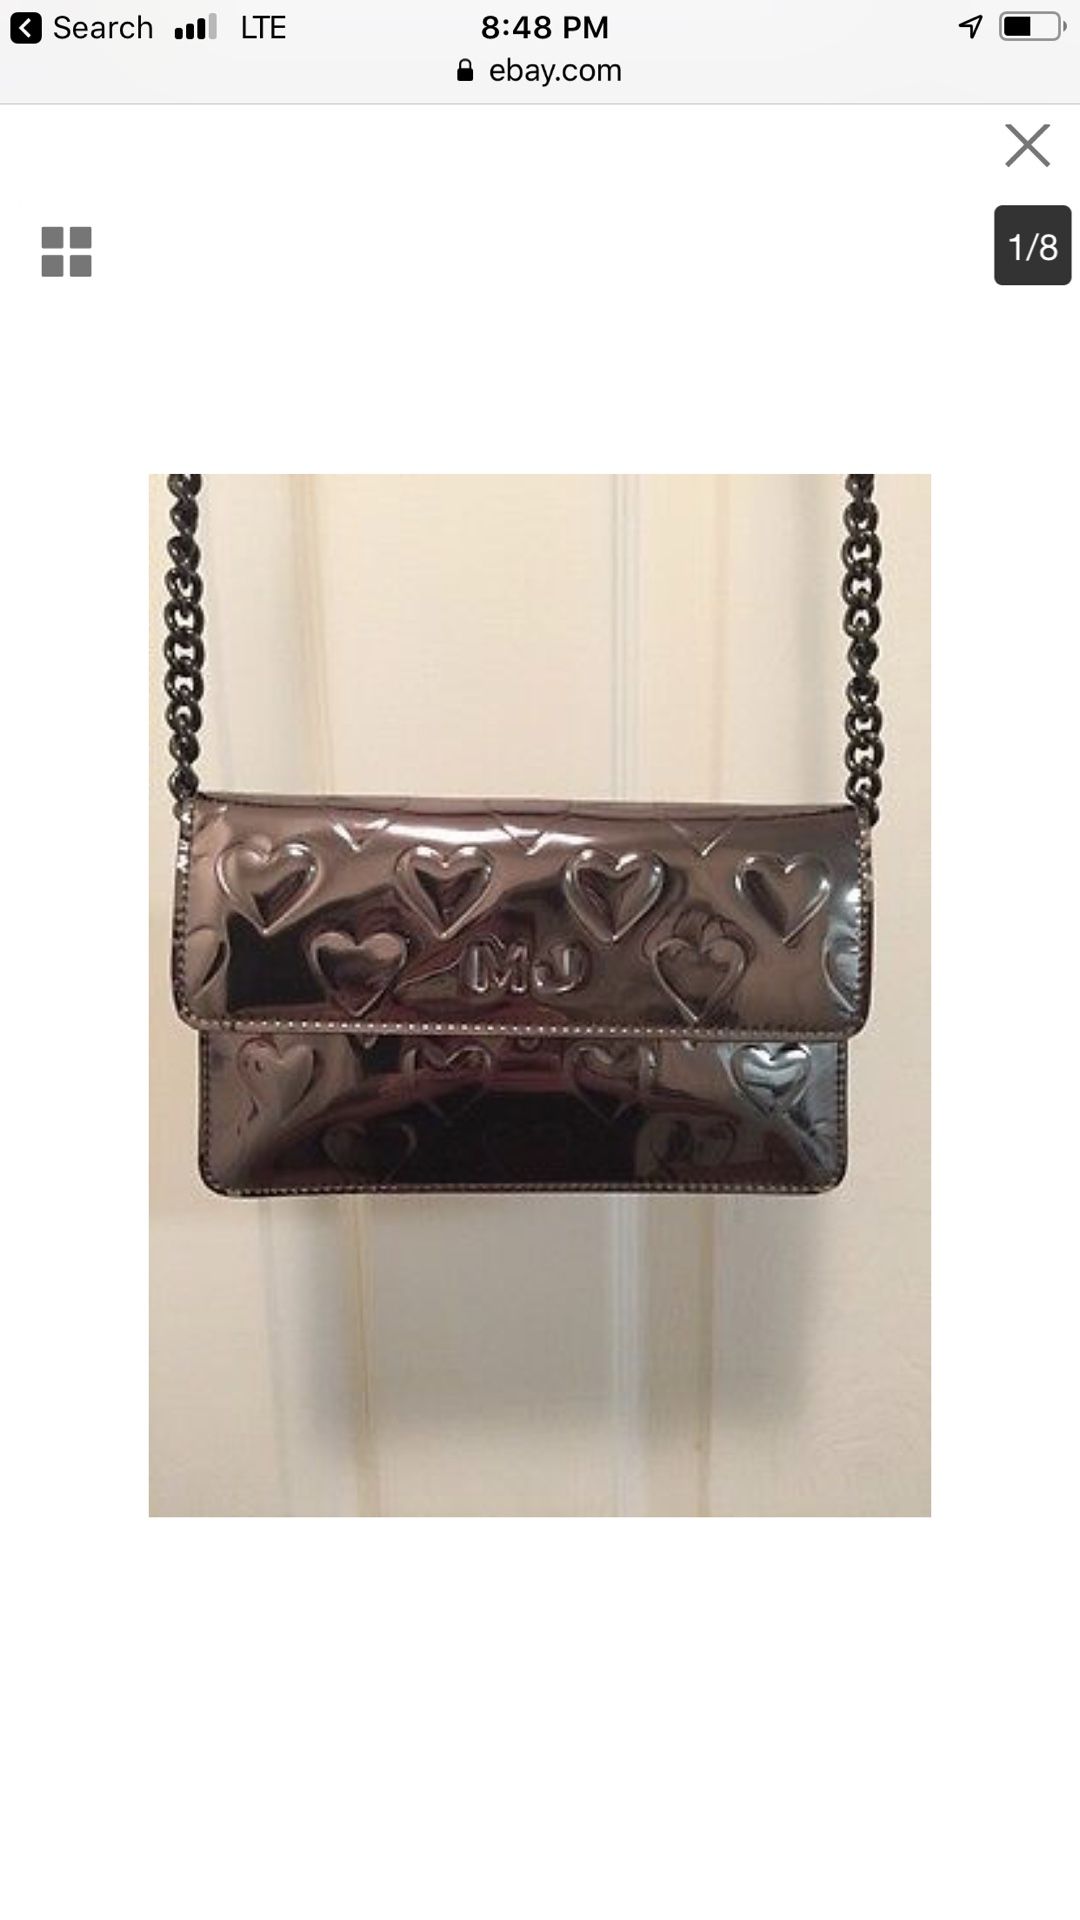 Marc Jacobs Mirror heart wallet purse! Only $65 original retail over $200